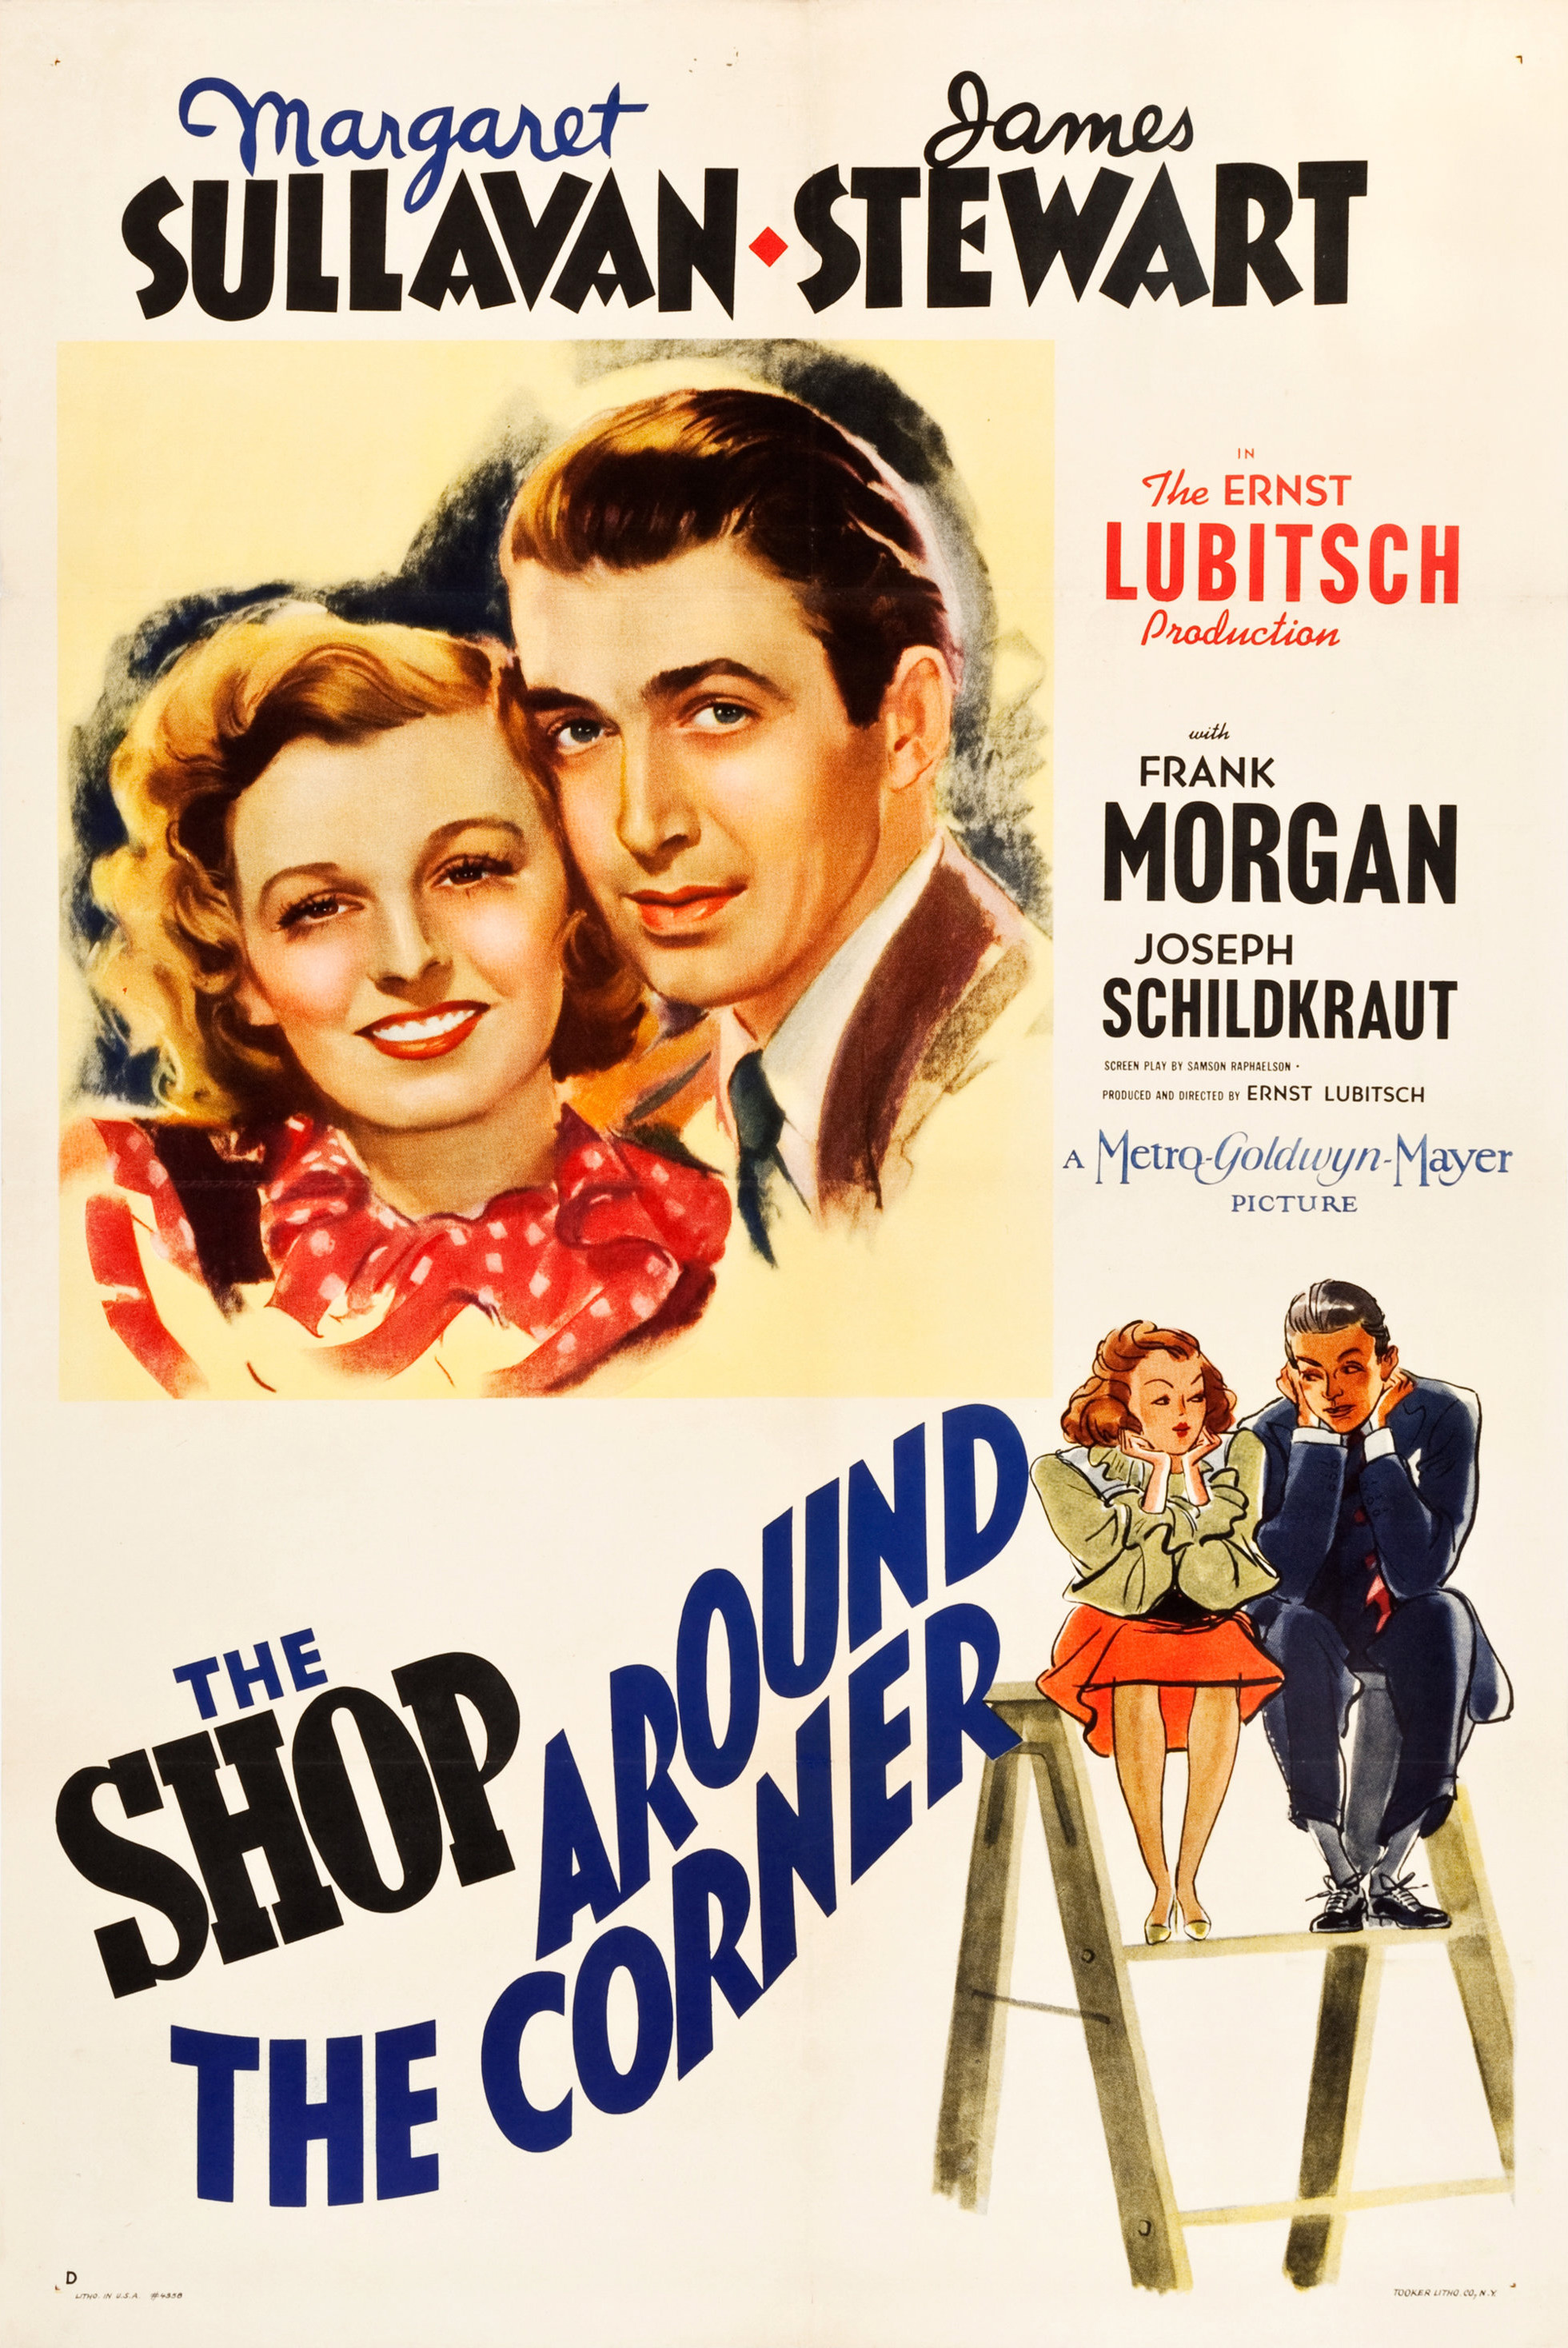 Its a white poster with picture of two people (Maureen Sullivan and Jimmy Stewart) face to face with wording about the movie on the right side. The shop around the corner title is at the bottom left and next to the couple sitting on a ledge. 